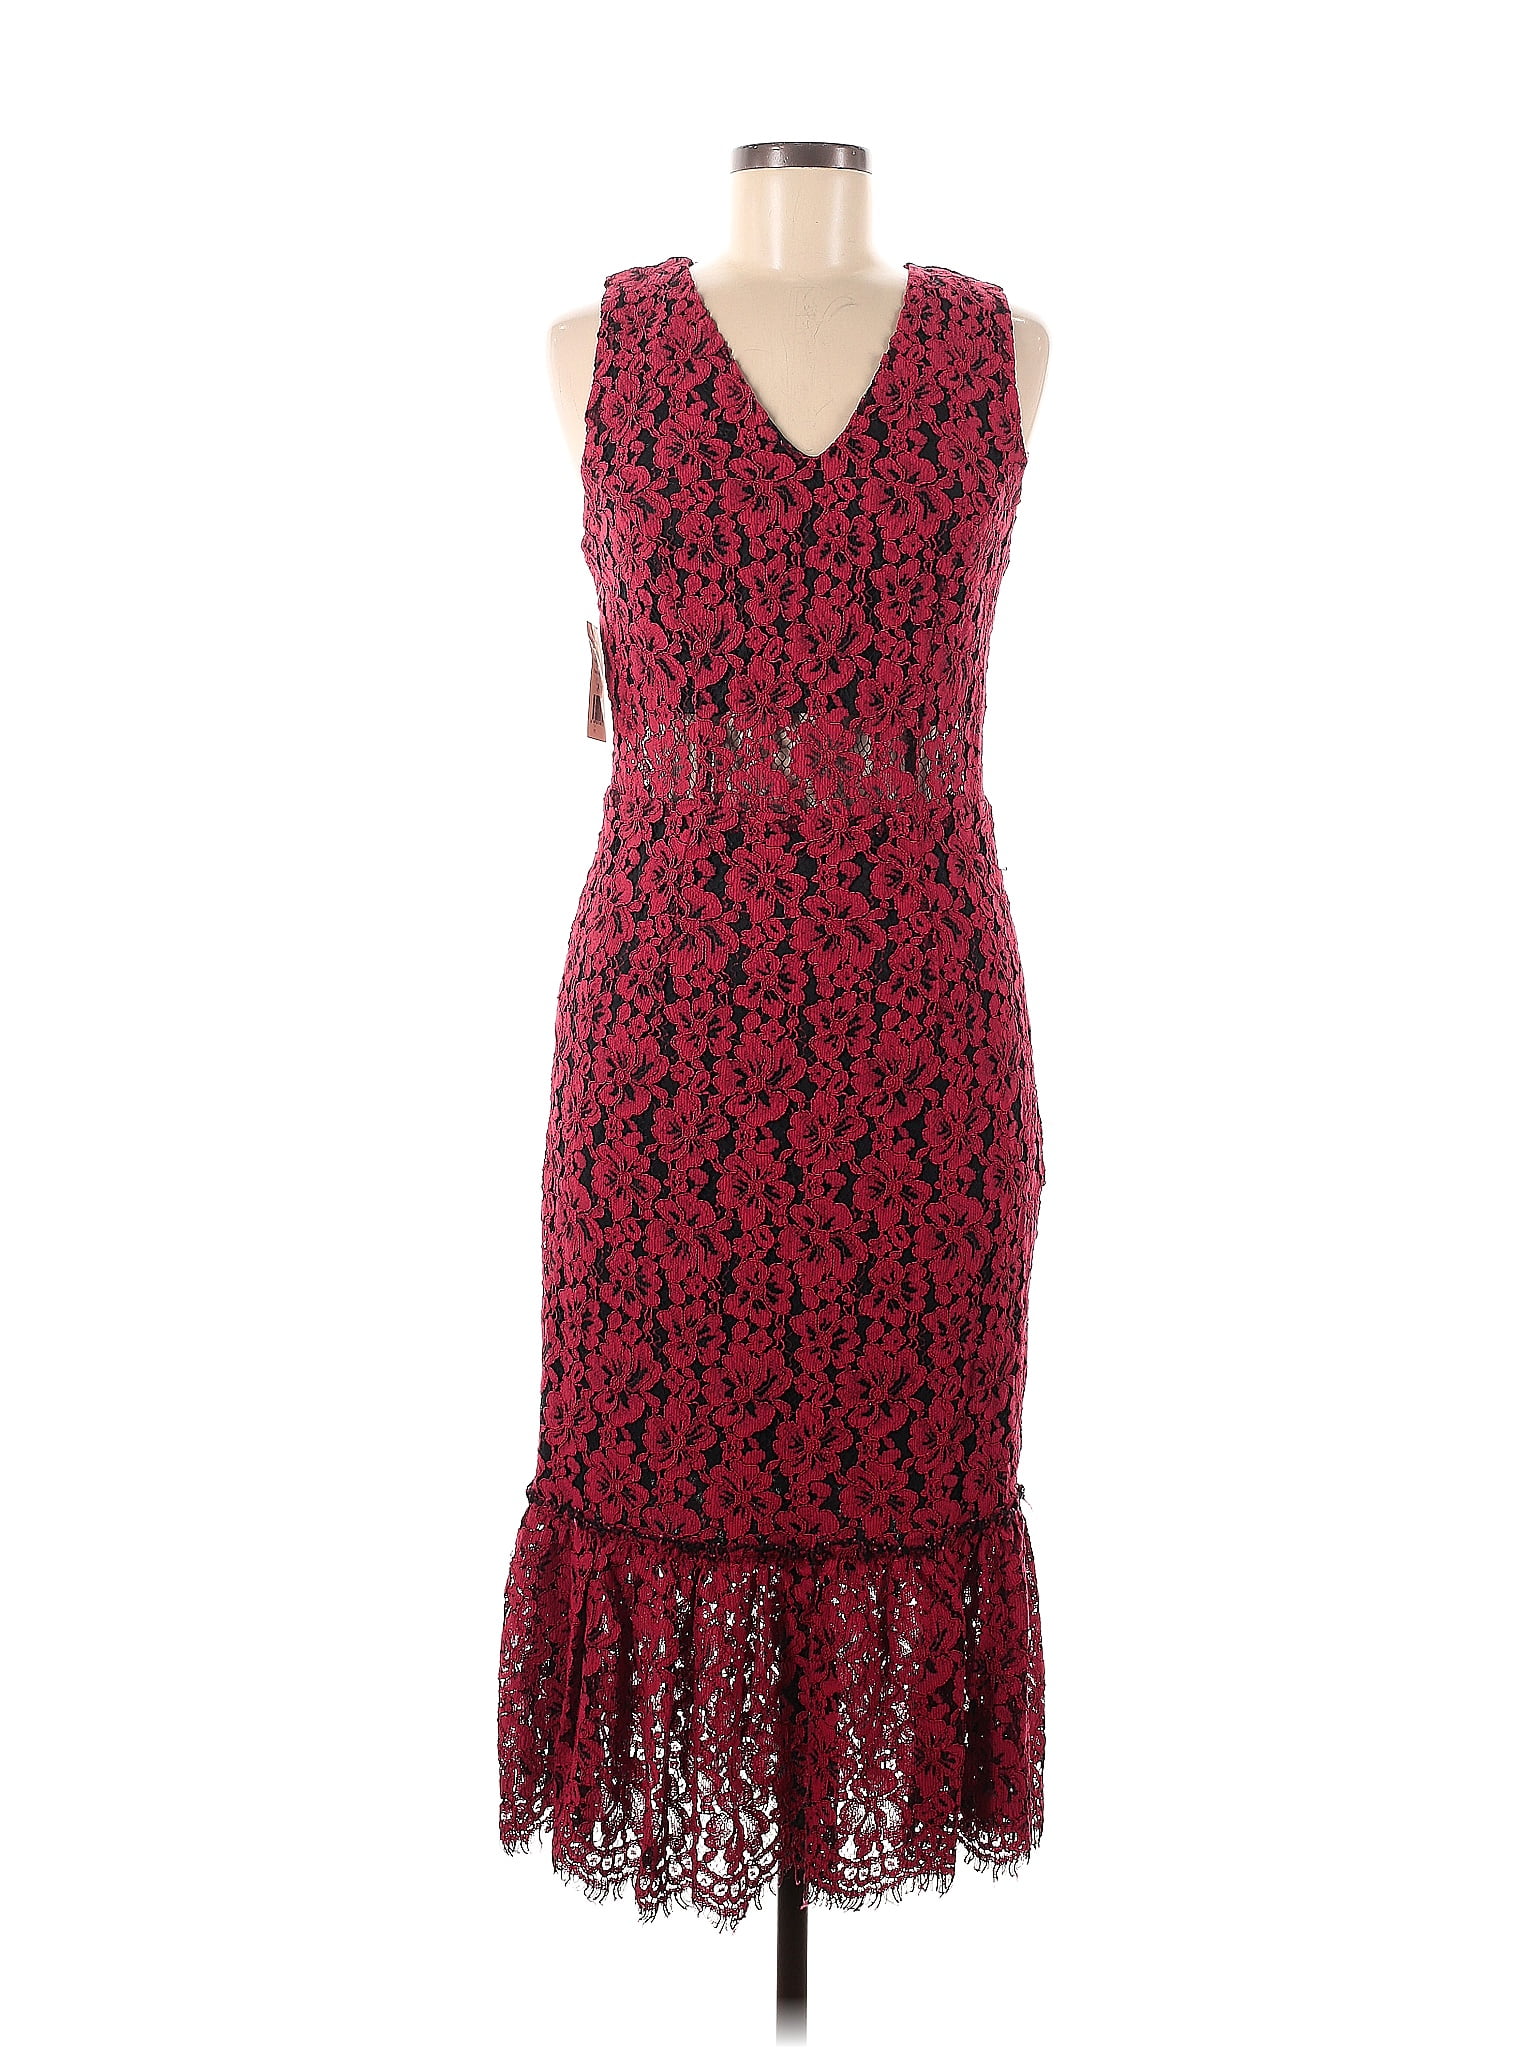 Alexia Admor Solid Multi Color Burgundy Cocktail Dress Size M - 79% off ...